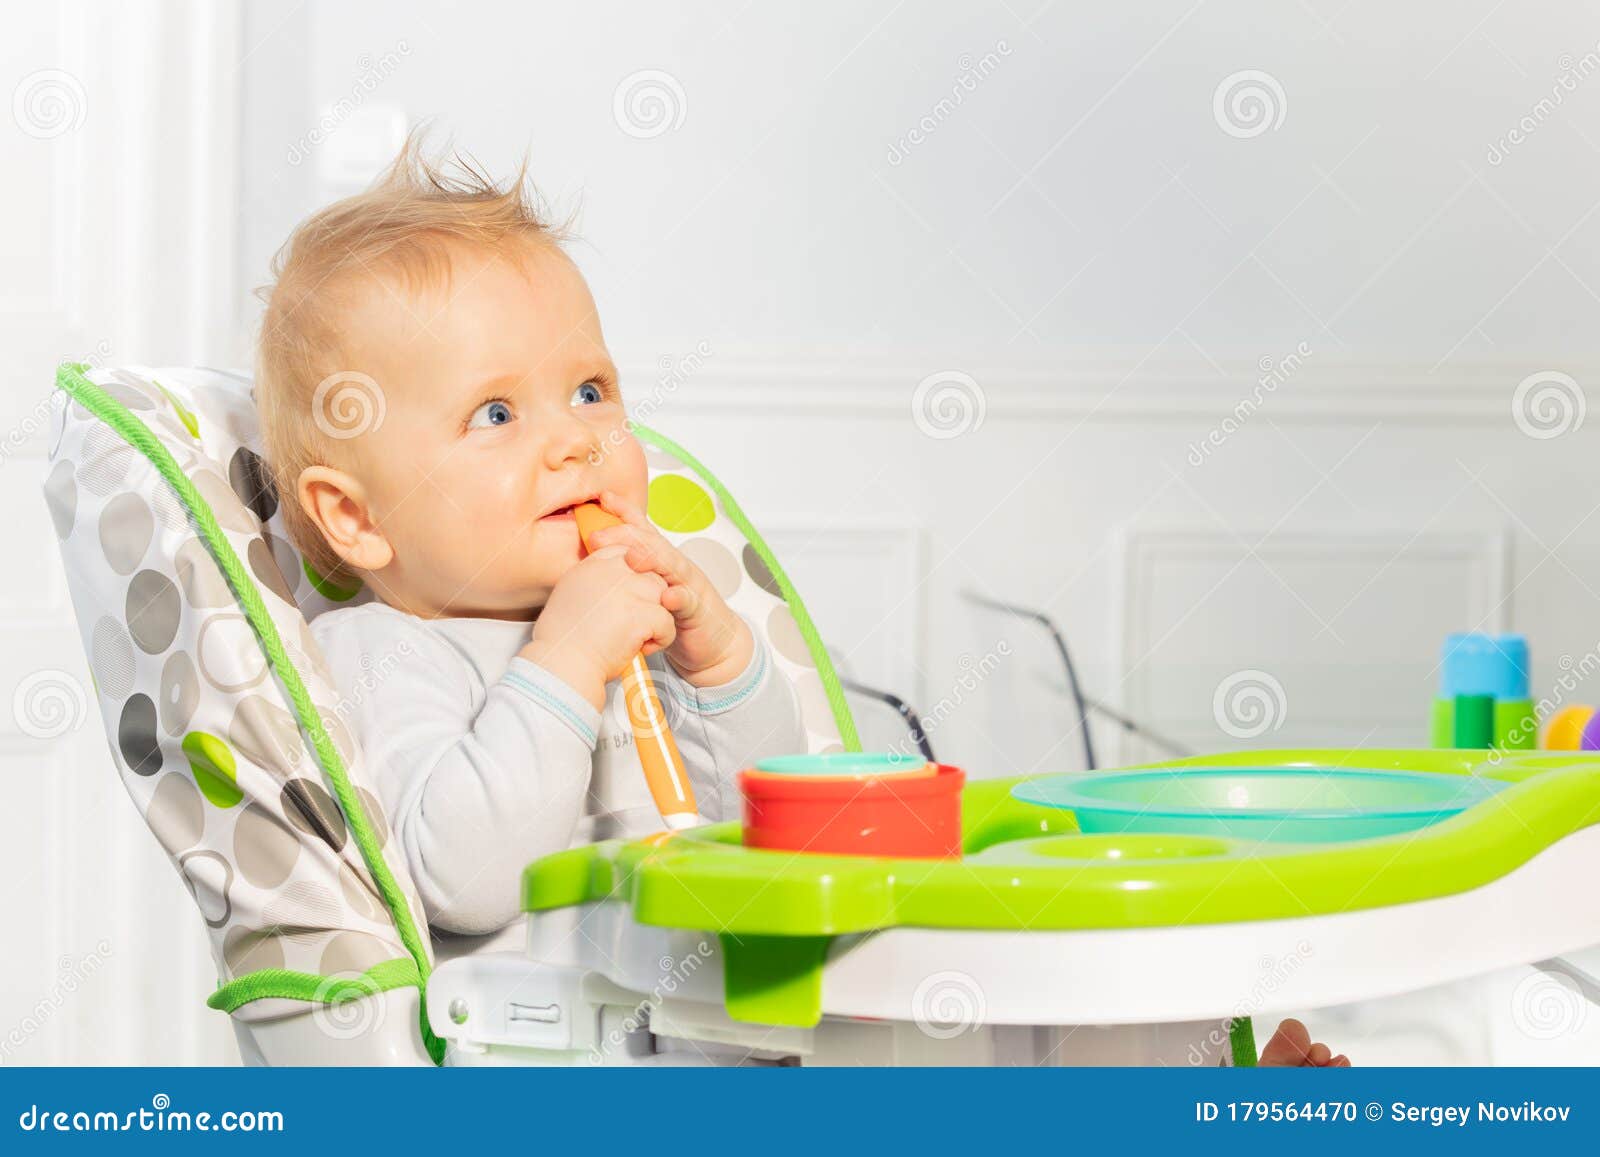 A Little Boy Is Sitting On A Chair. Stock Image - Image of 